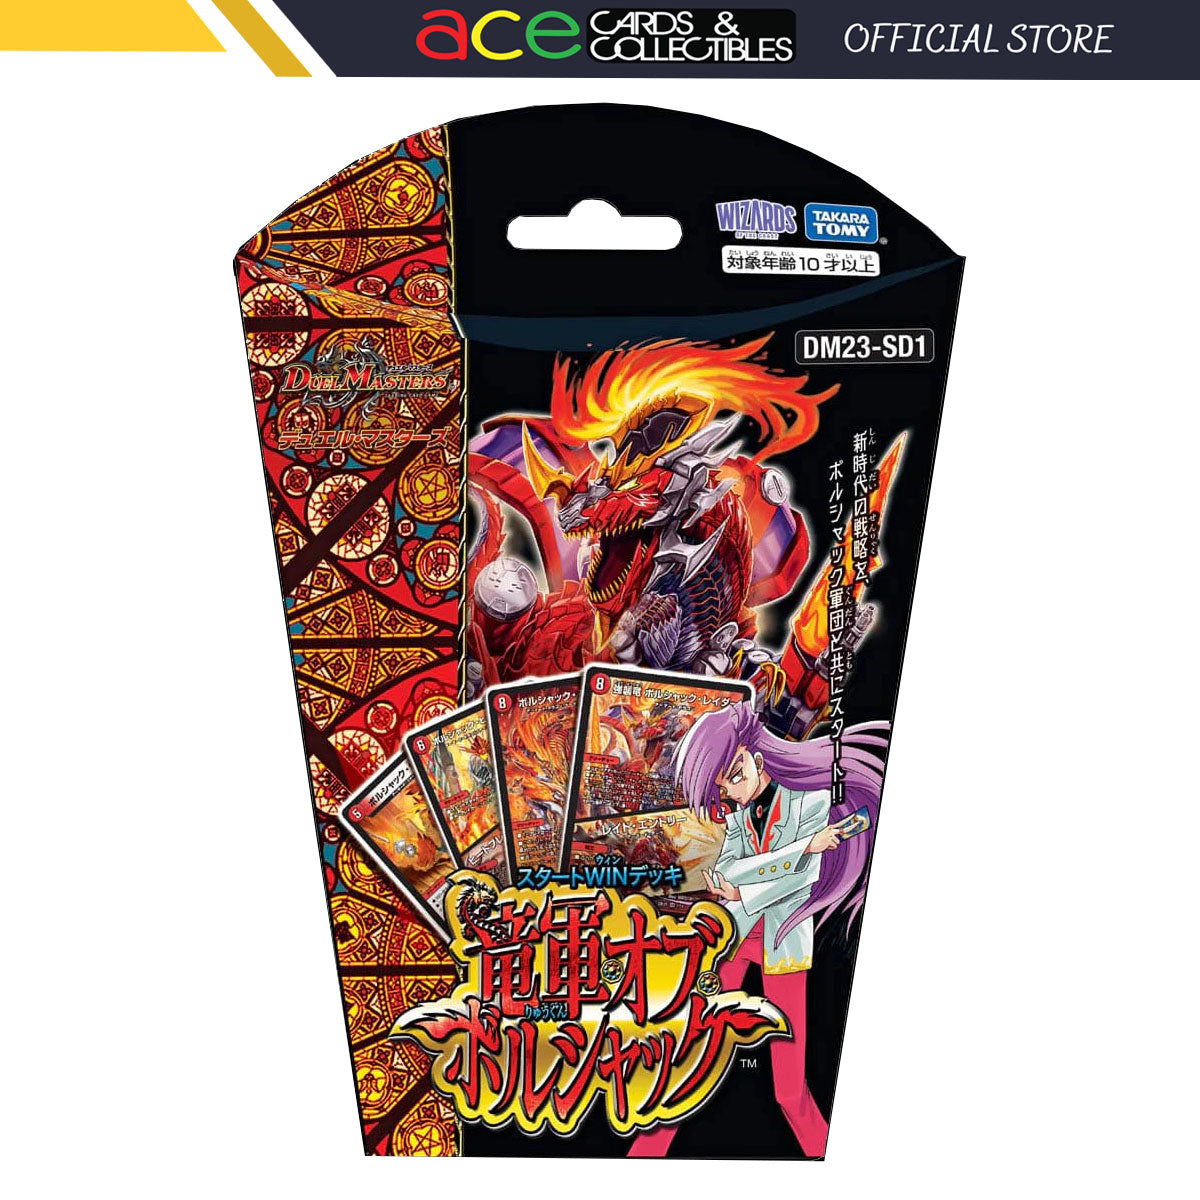 Duel Masters TCG Start Win Deck "Dragon Army of Bolshack" [DM23-SD1] (Japanese)-Takara Tomy-Ace Cards & Collectibles